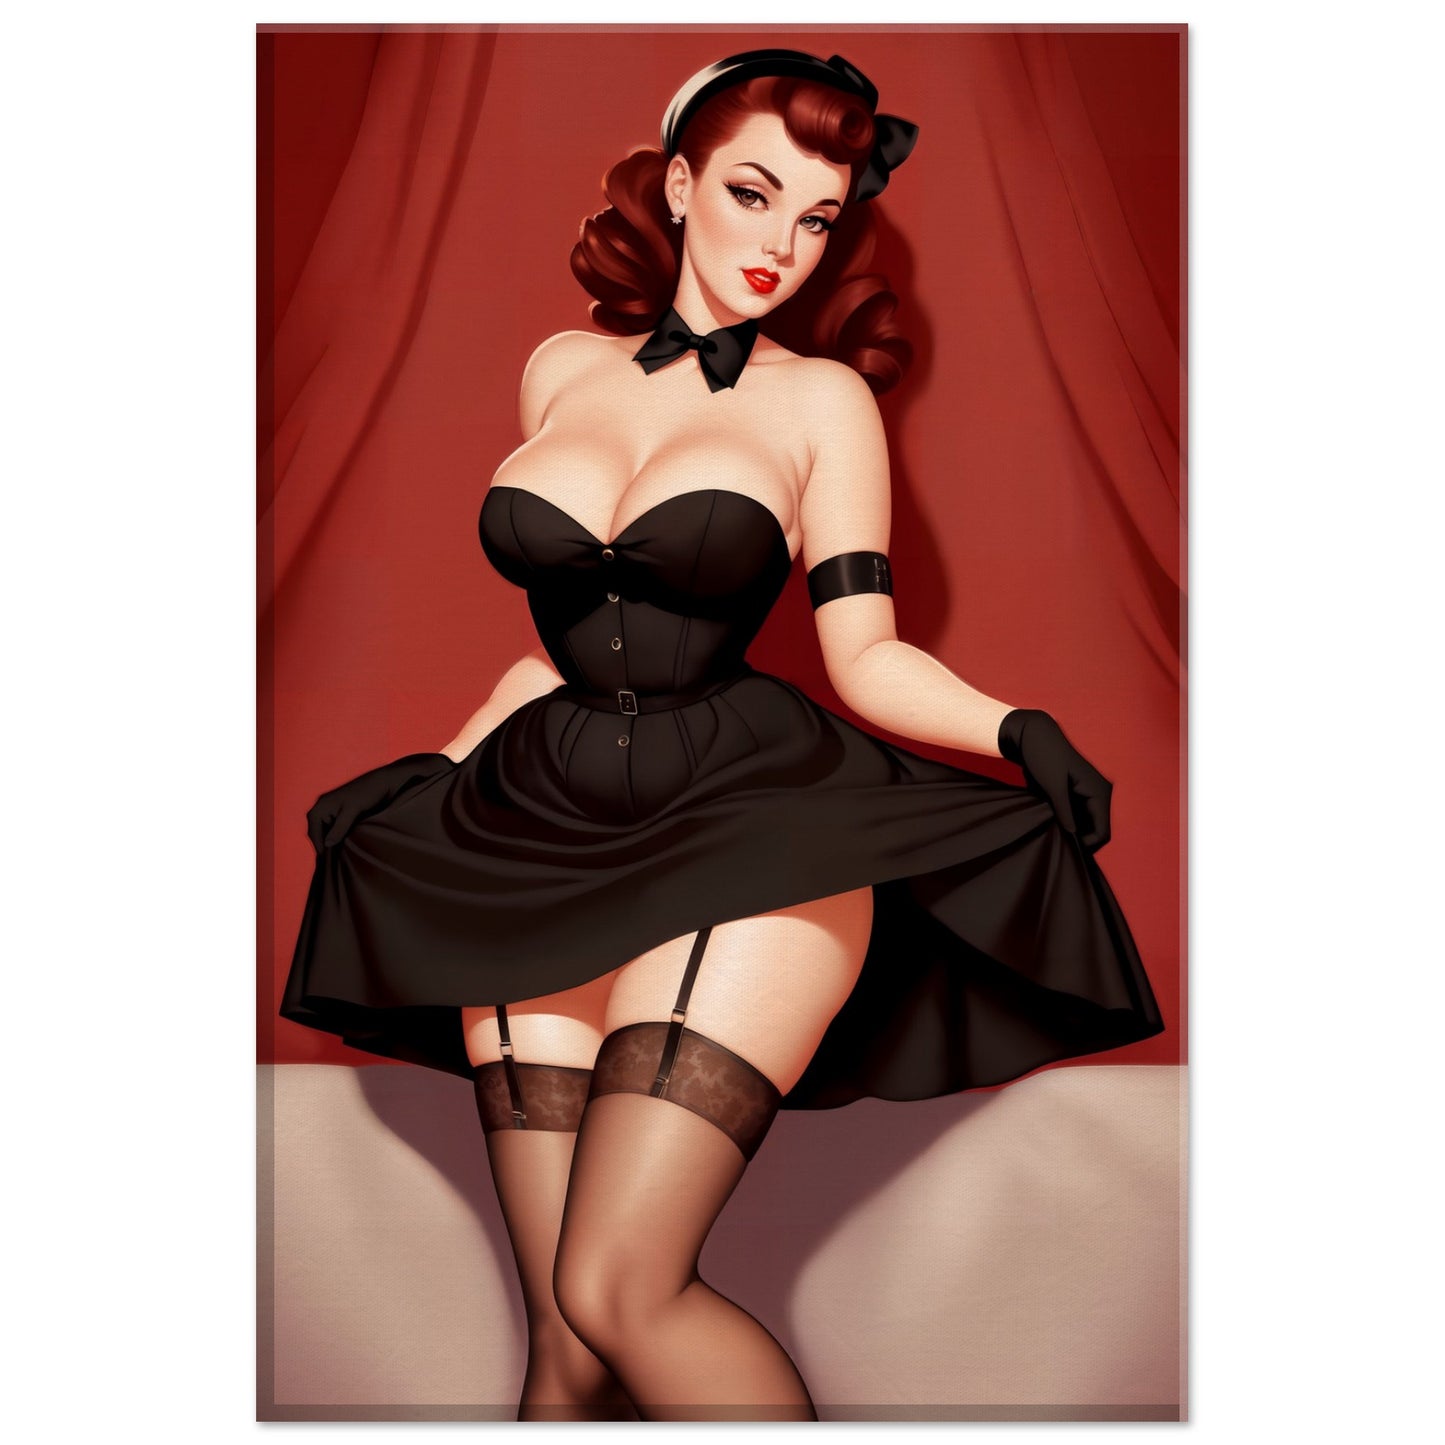 The Daily Pinup #101 - Pulp Beauty Wall Art